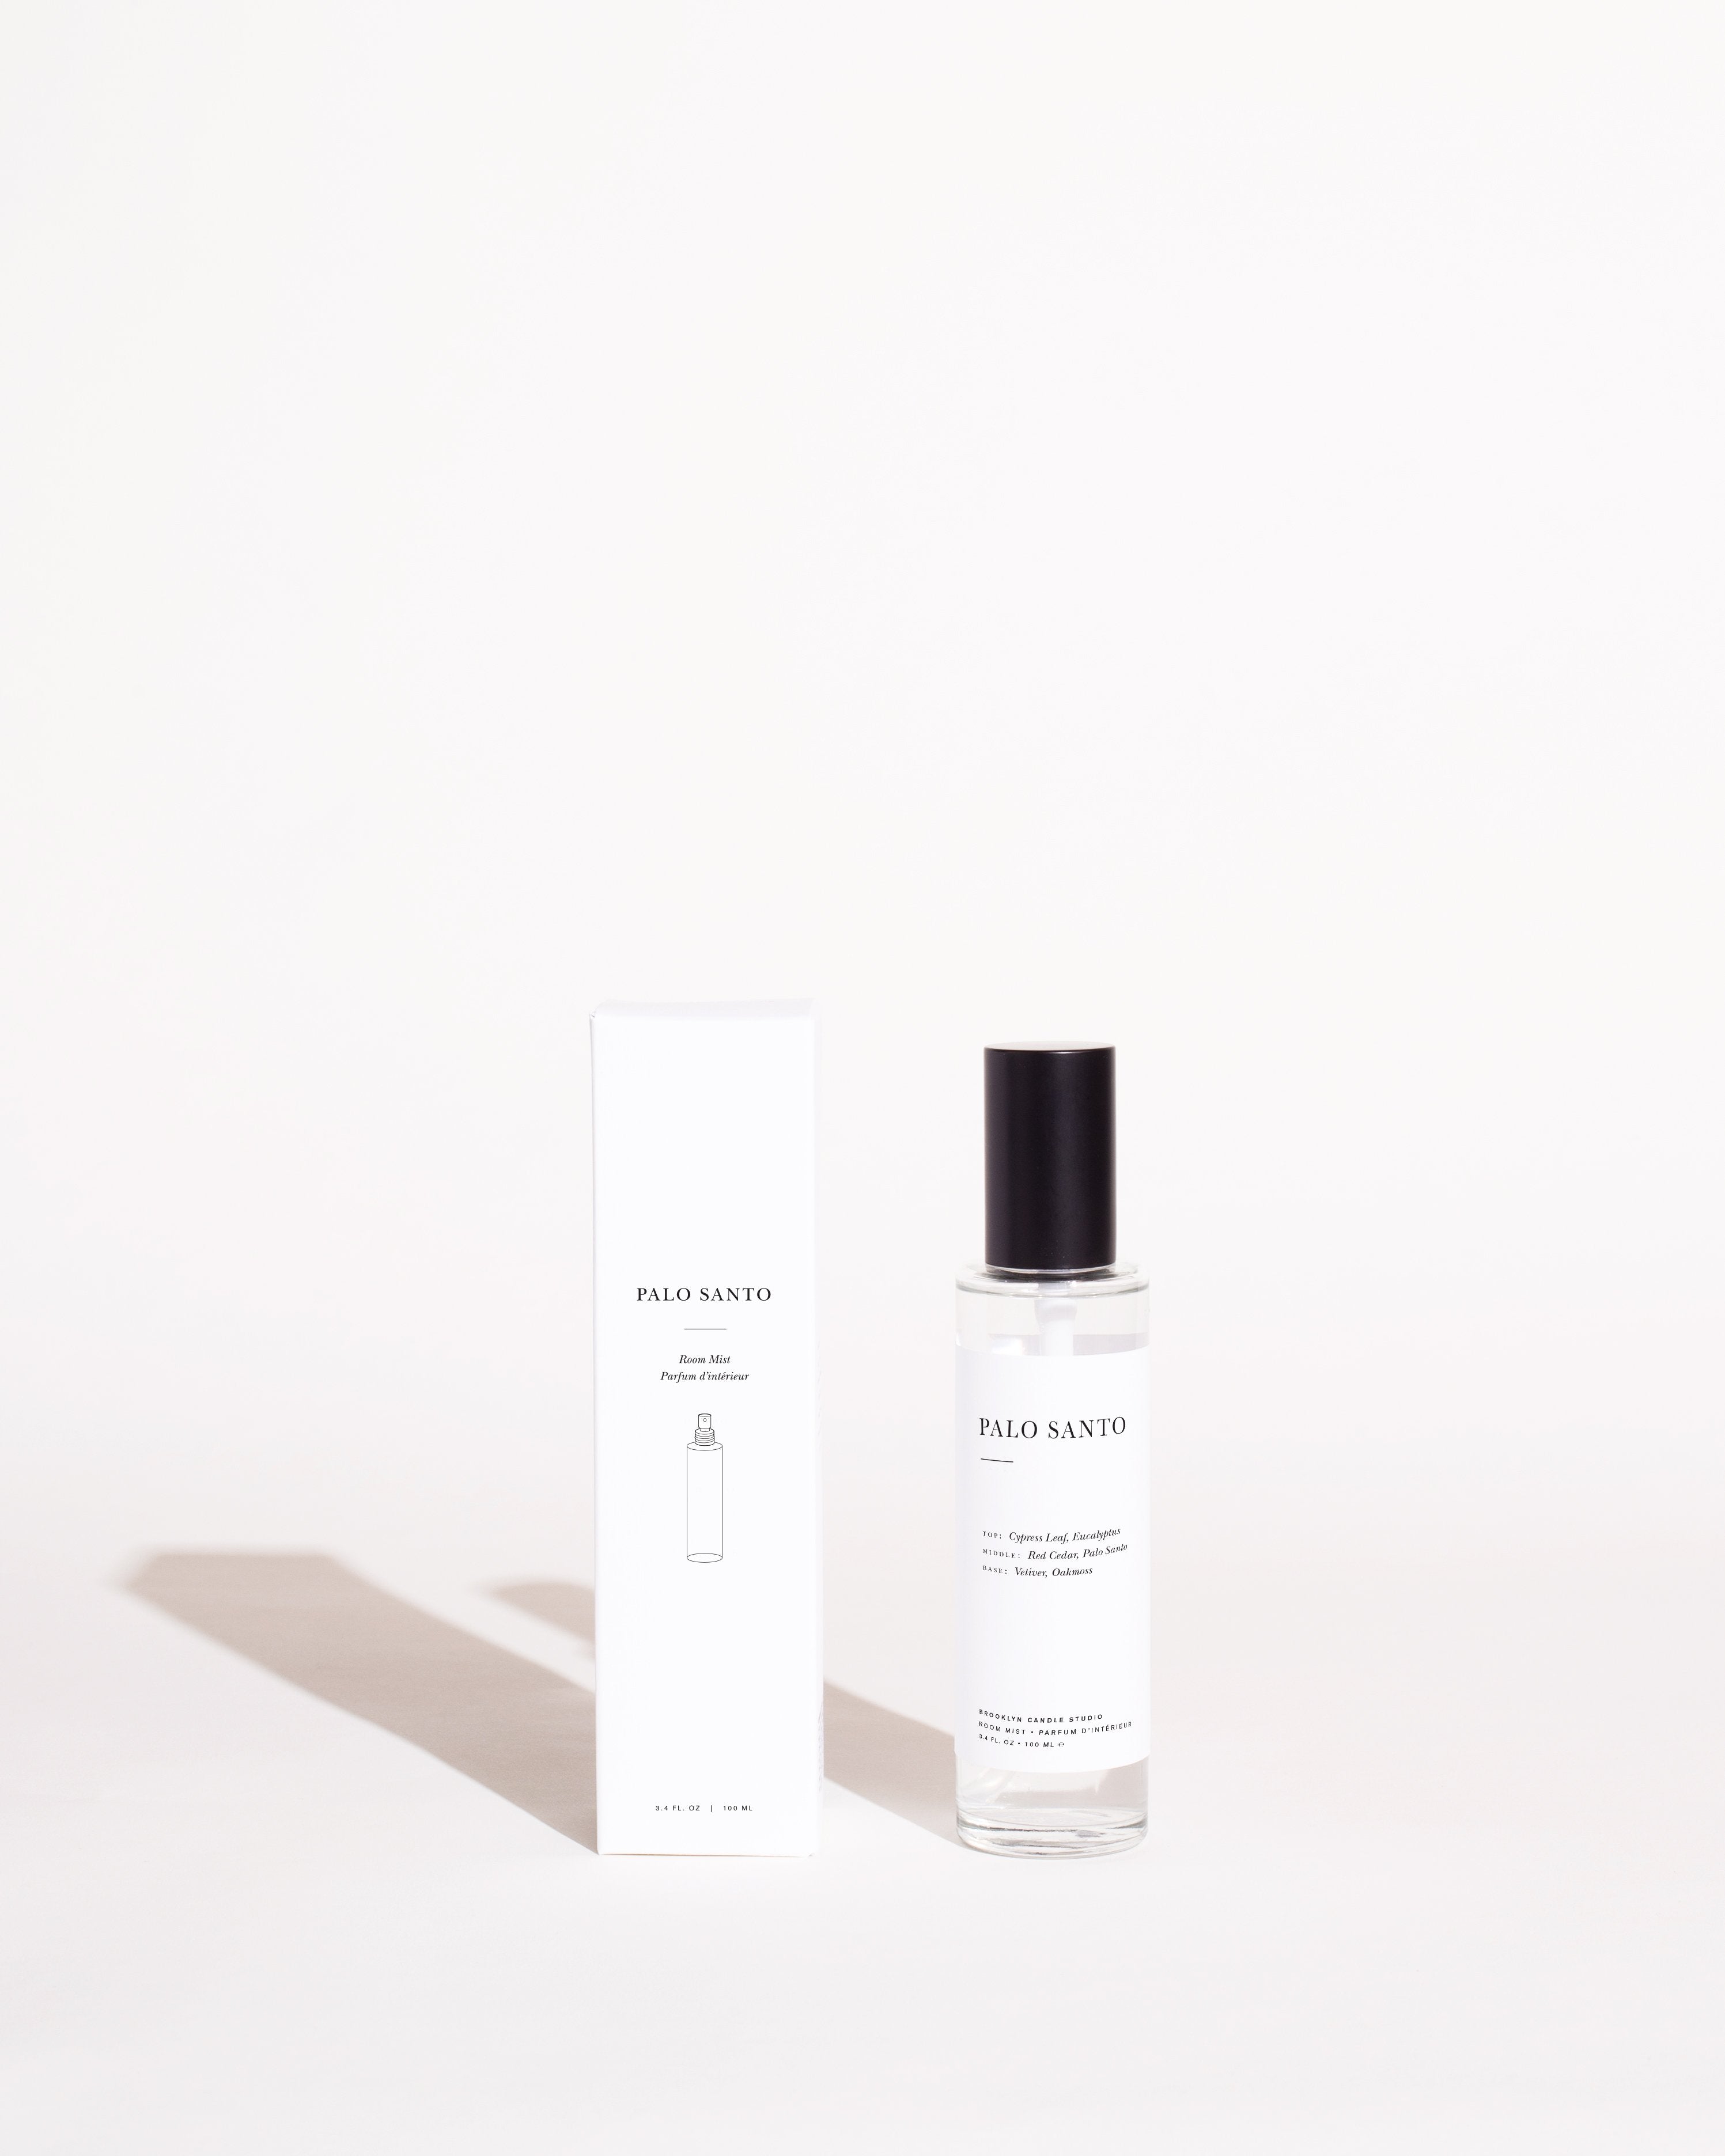 A minimalist photo featuring a Palo Santo Room Mist by Brooklyn Candle Studio bottle with a black cap next to its corresponding white, rectangular packaging box. Both the bottle and the box display the product name and descriptions in a simple, elegant font against a light background, emphasizing its essential oils blend.